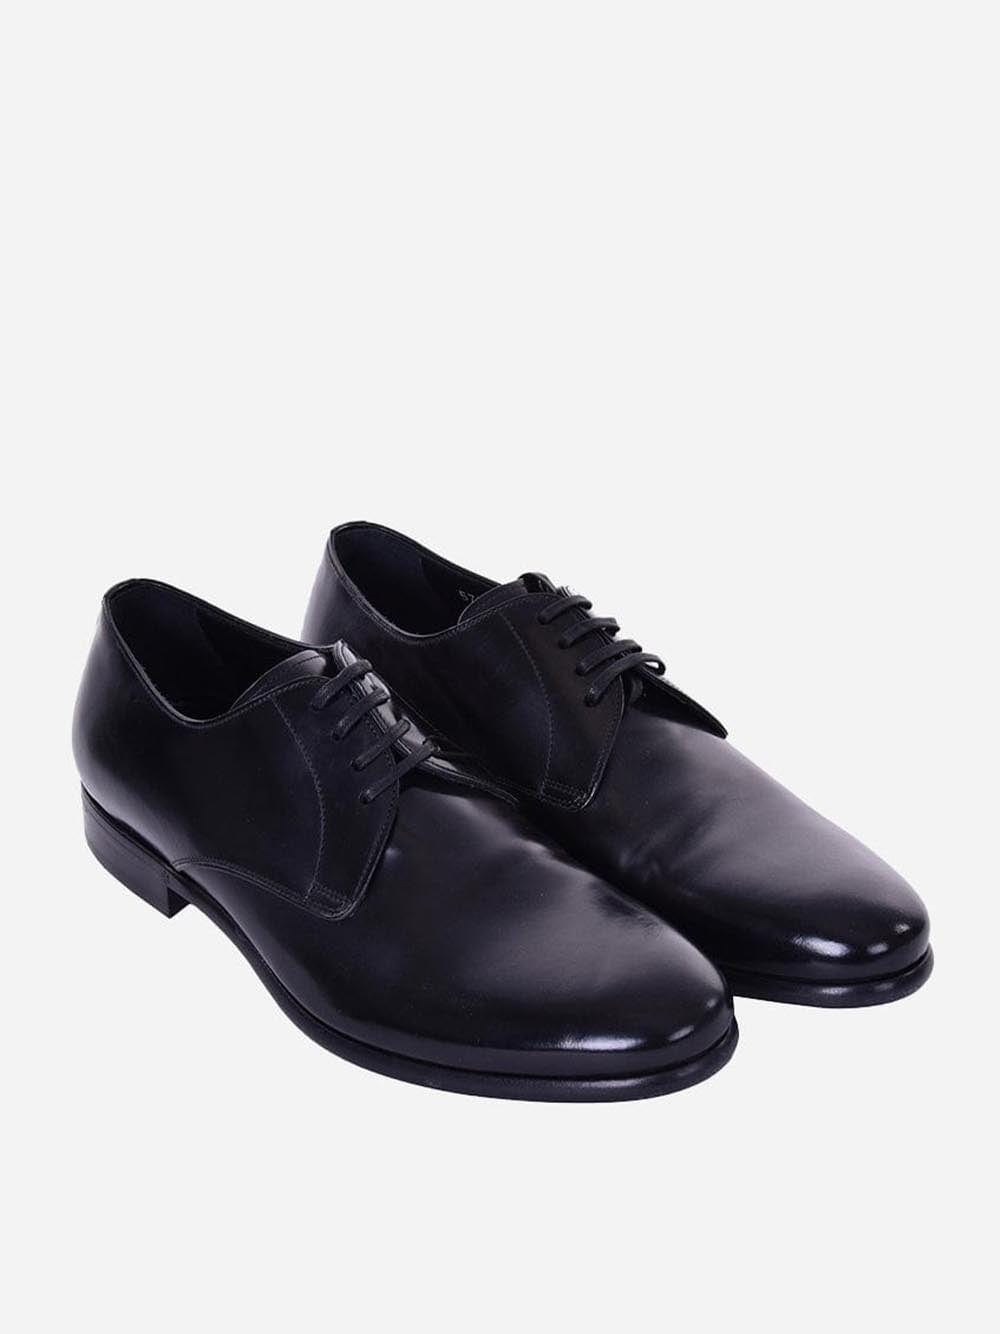 Dolce & Gabbana Formal Derby Leather Shoes